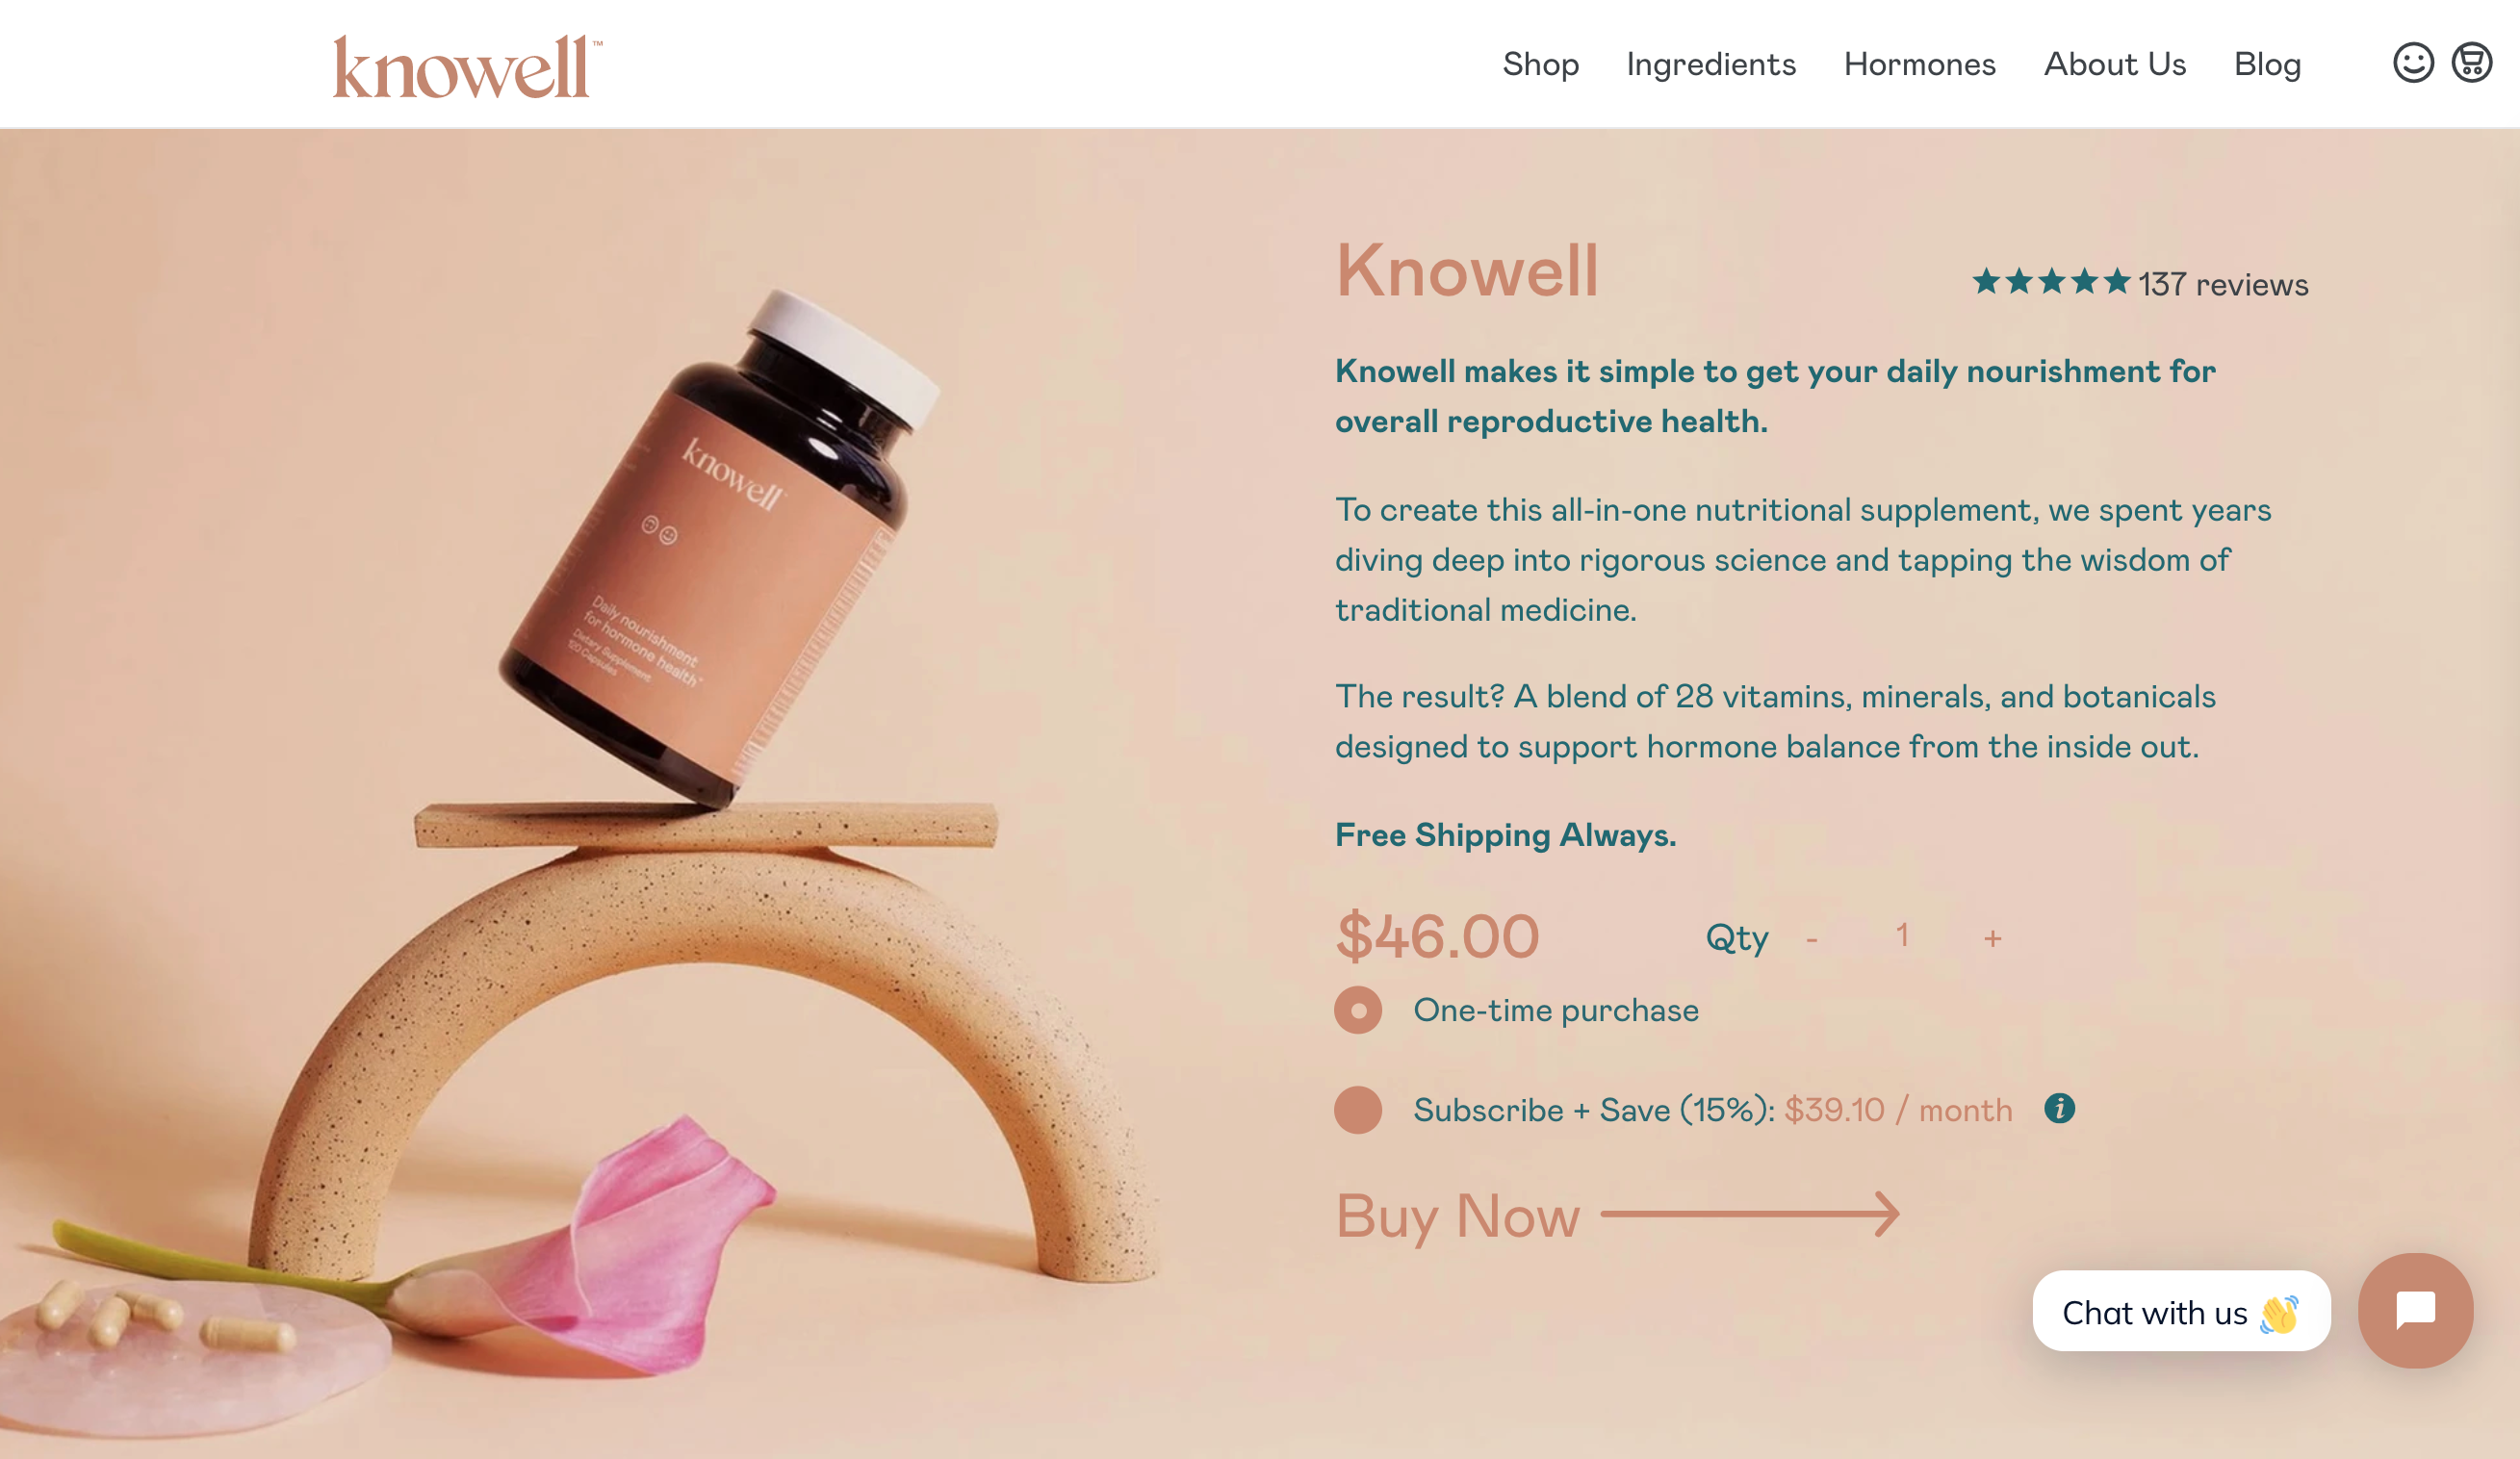 Example of a product page on Knowell's website.